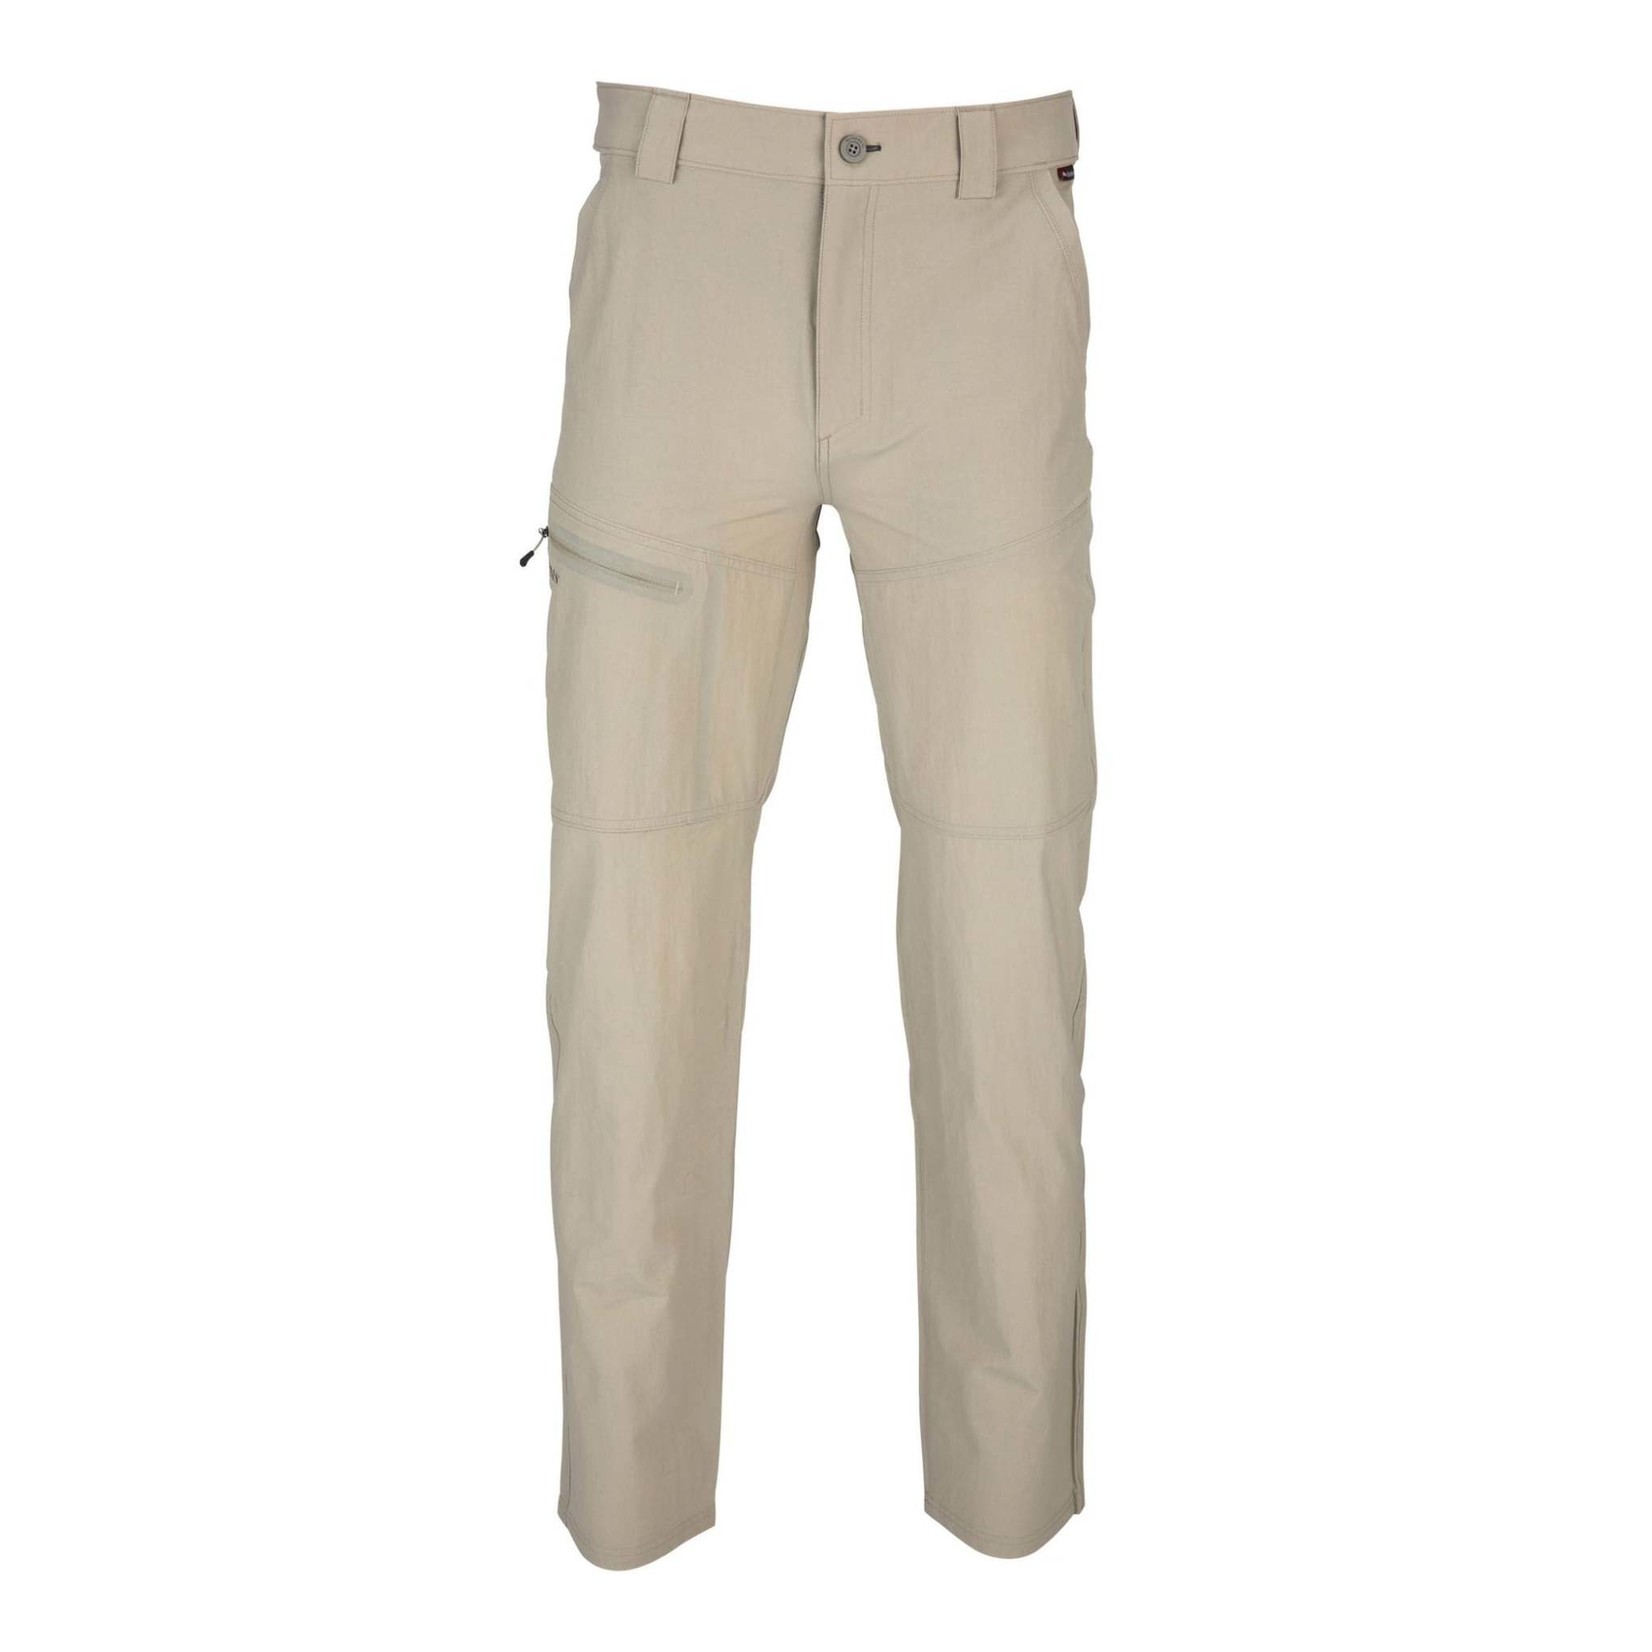 SIMMS GUIDE PANTS - Black Dog Outdoor Sports